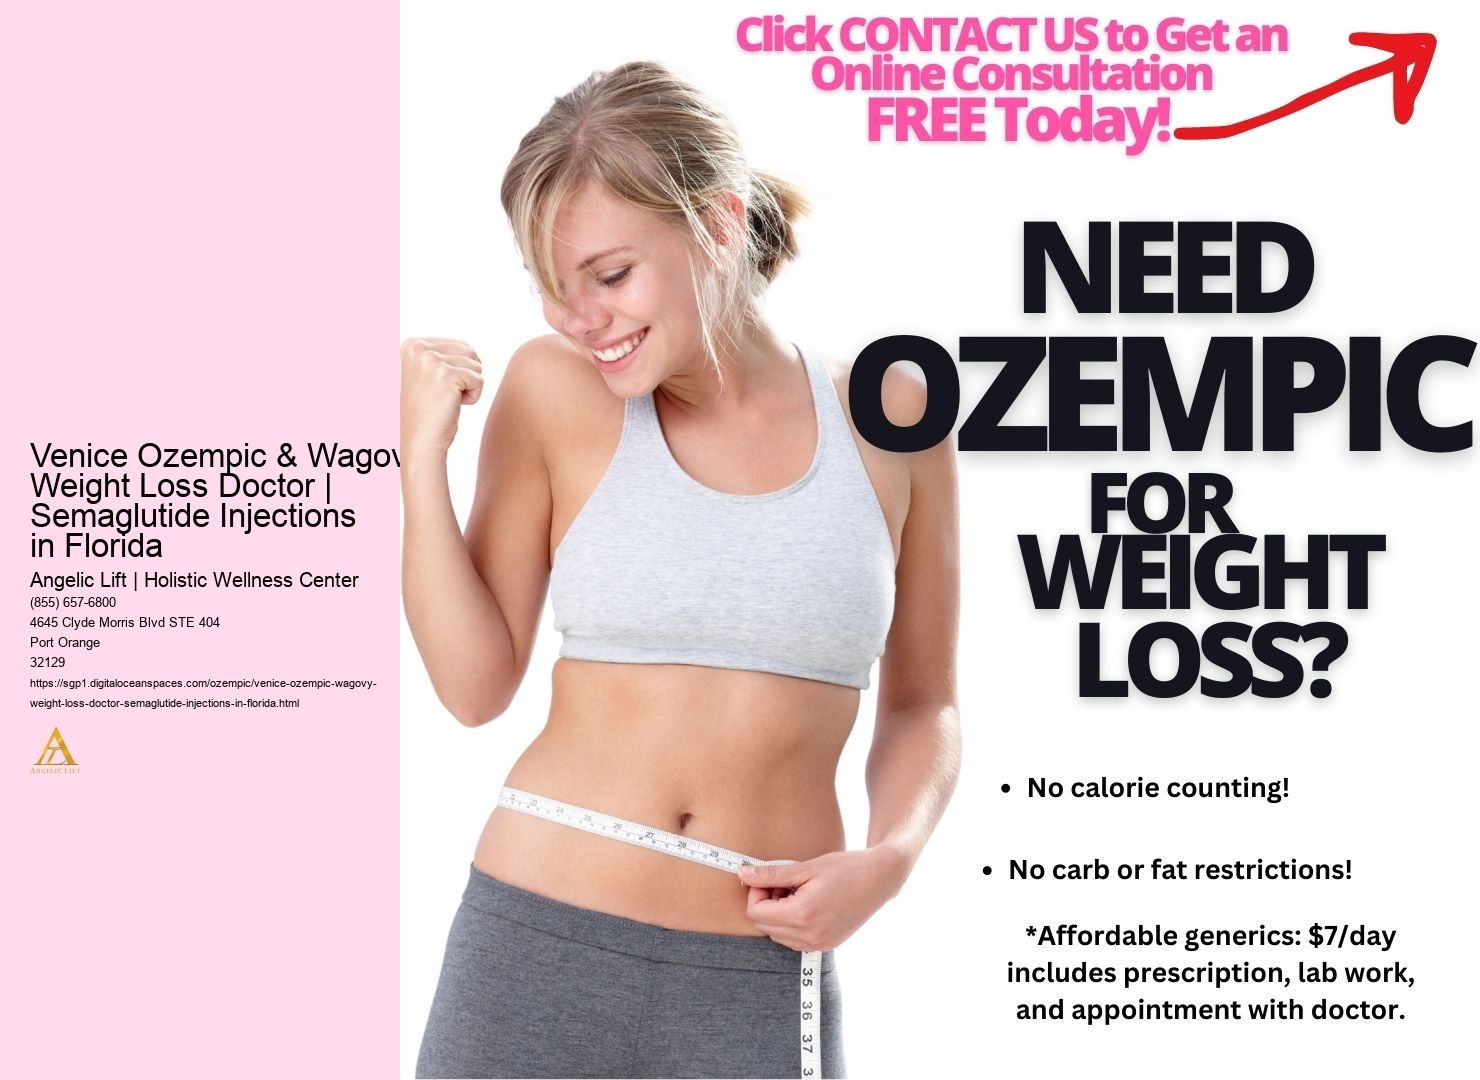 Venice Ozempic & Wagovy Weight Loss Doctor | Semaglutide Injections in Florida